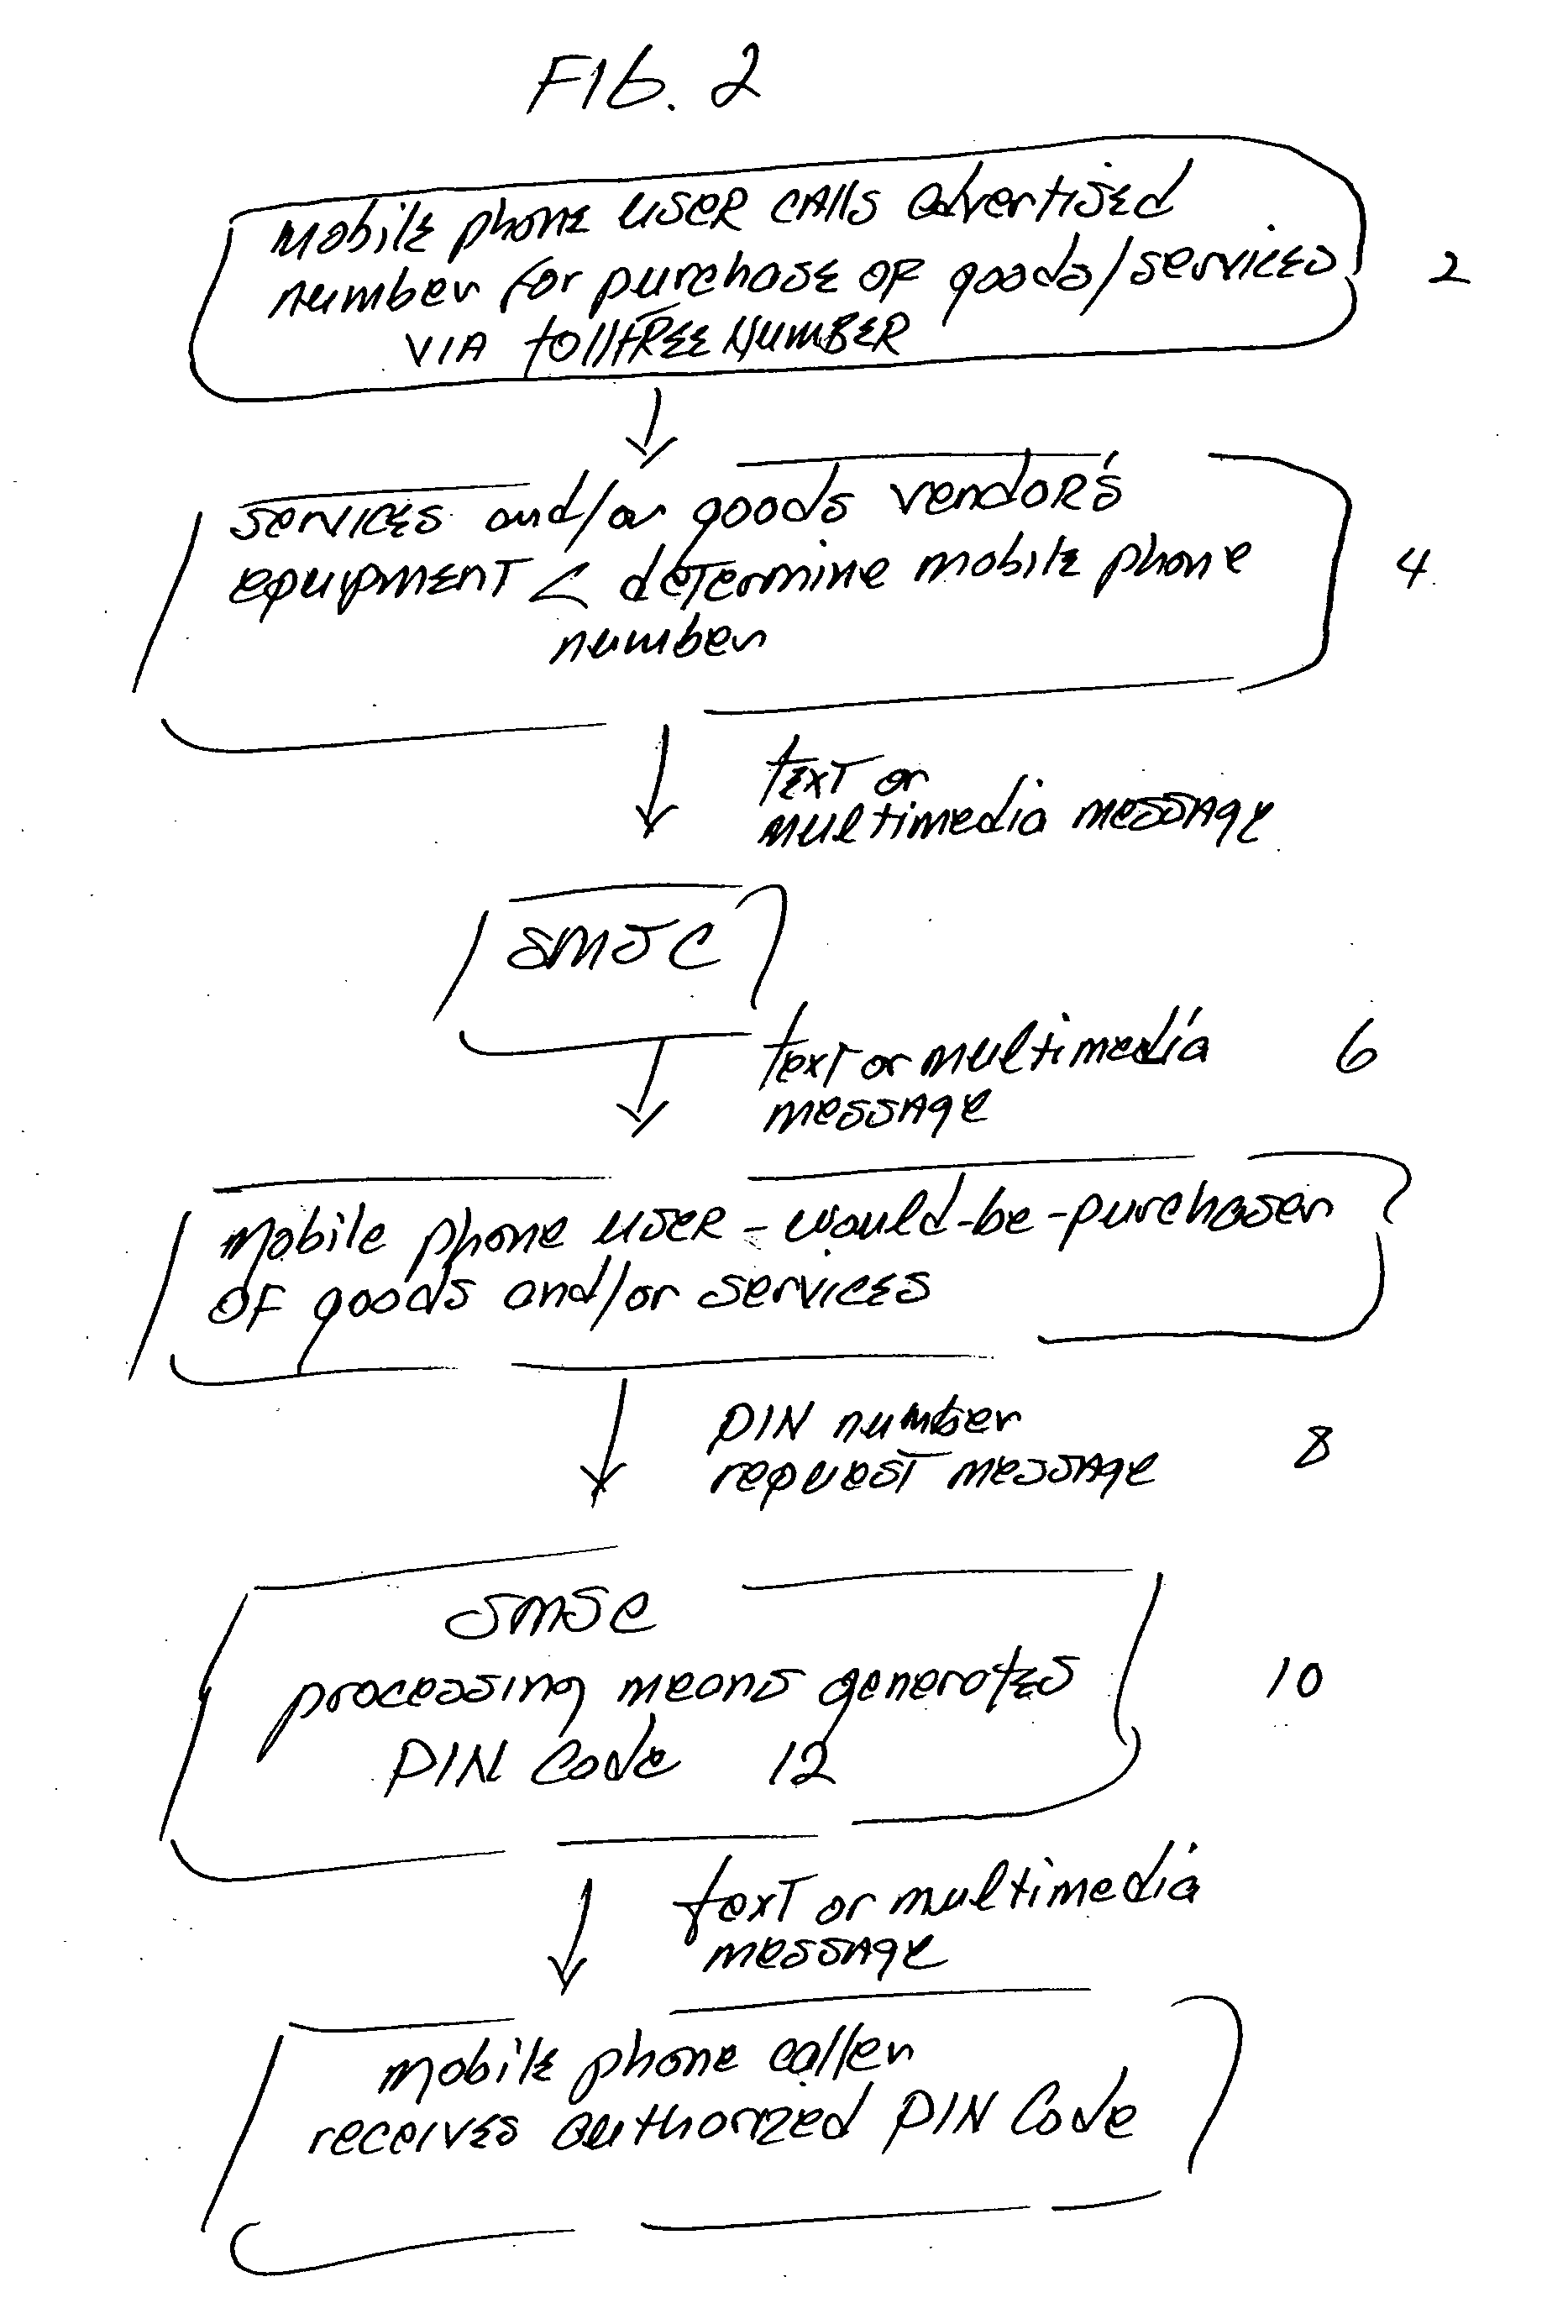 Telephone and toll-free initiated messaging business method, system and method of conducting business